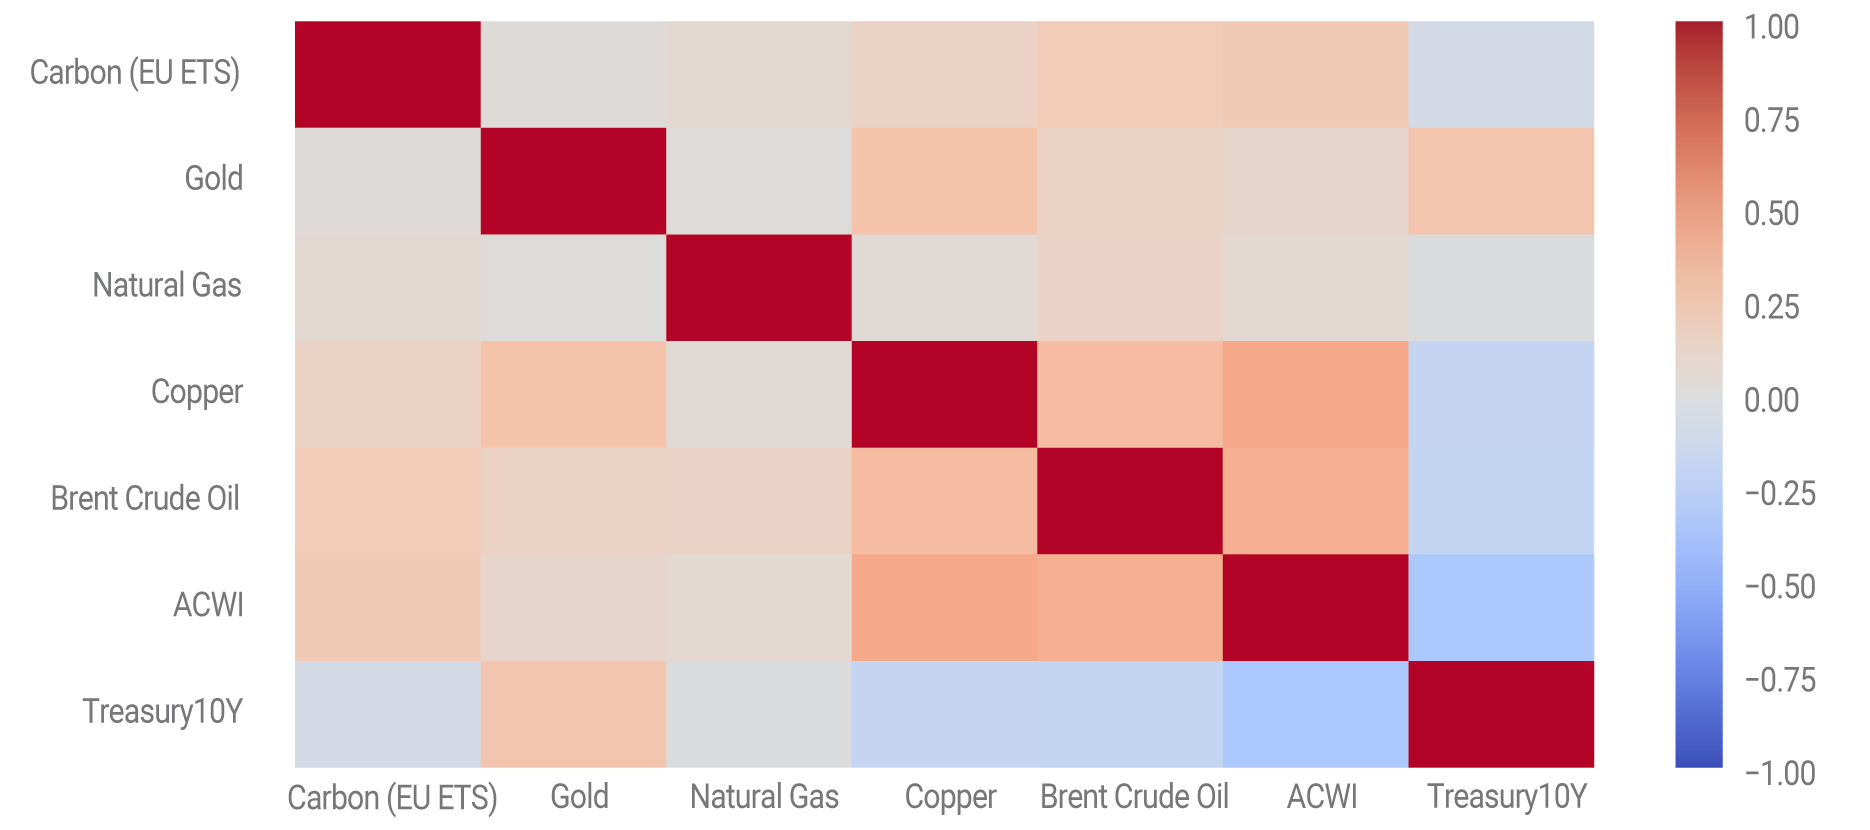 We depict the correlation between Carbon EU ETS and other commodities and assets.